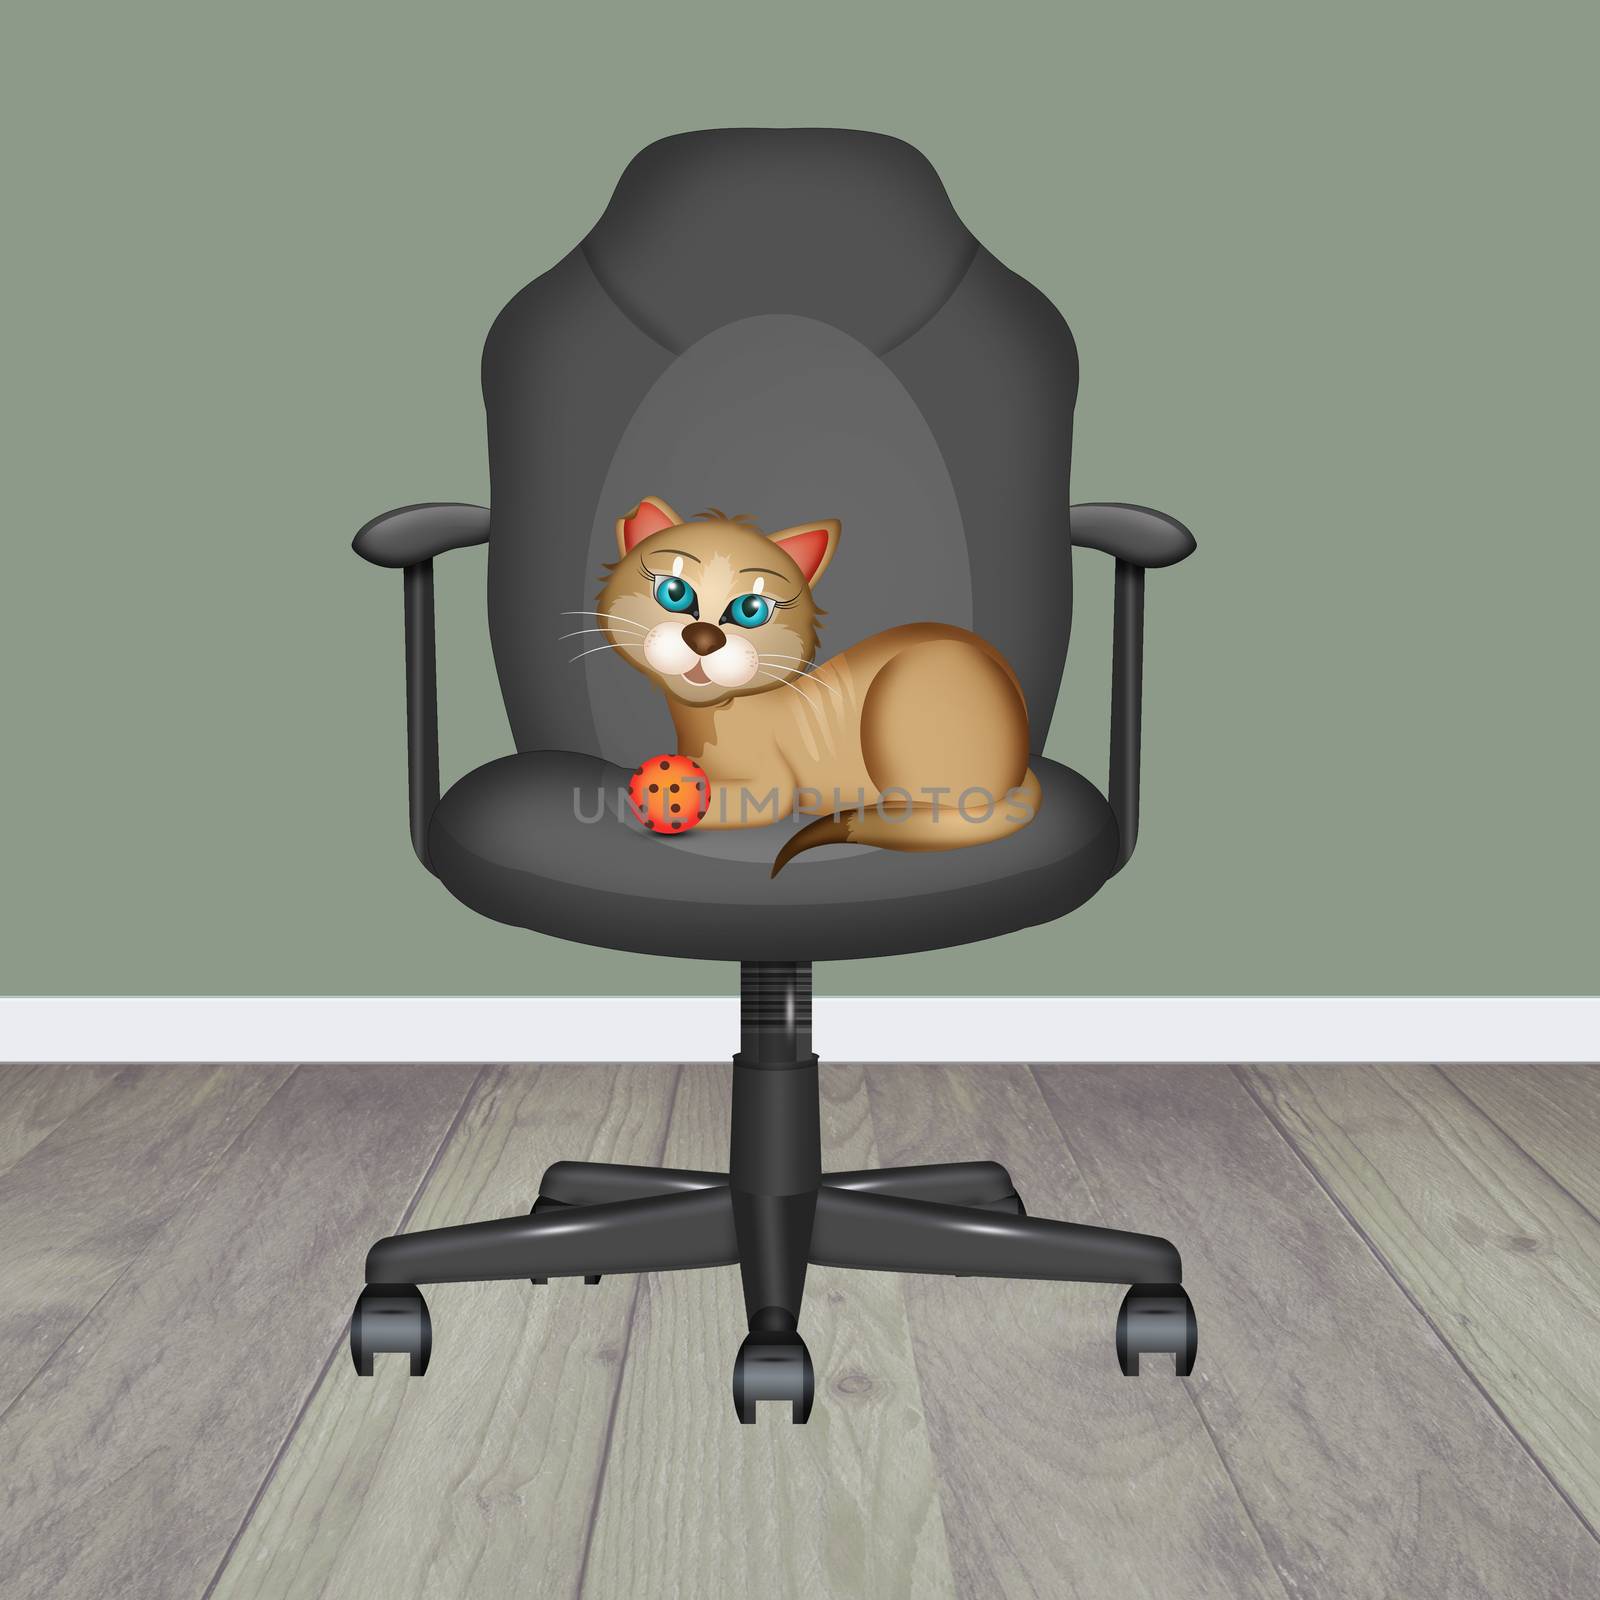 cat on office chair by adrenalina